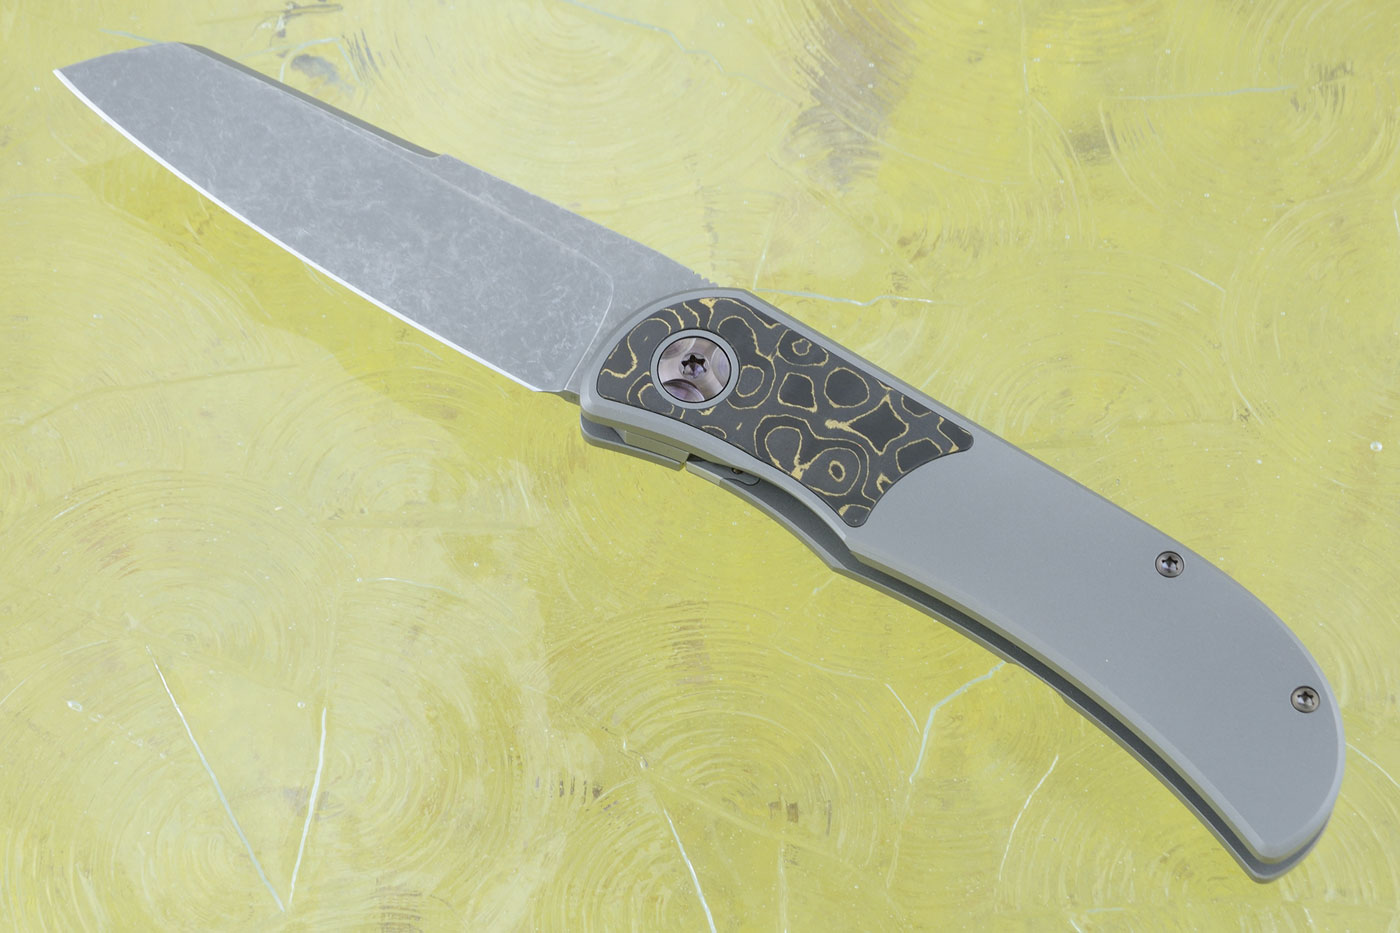 LEXK SFL Framelock Front Flipper with Gold Camo FatCarbon Inlay - Stonewash, Sheepsfoot